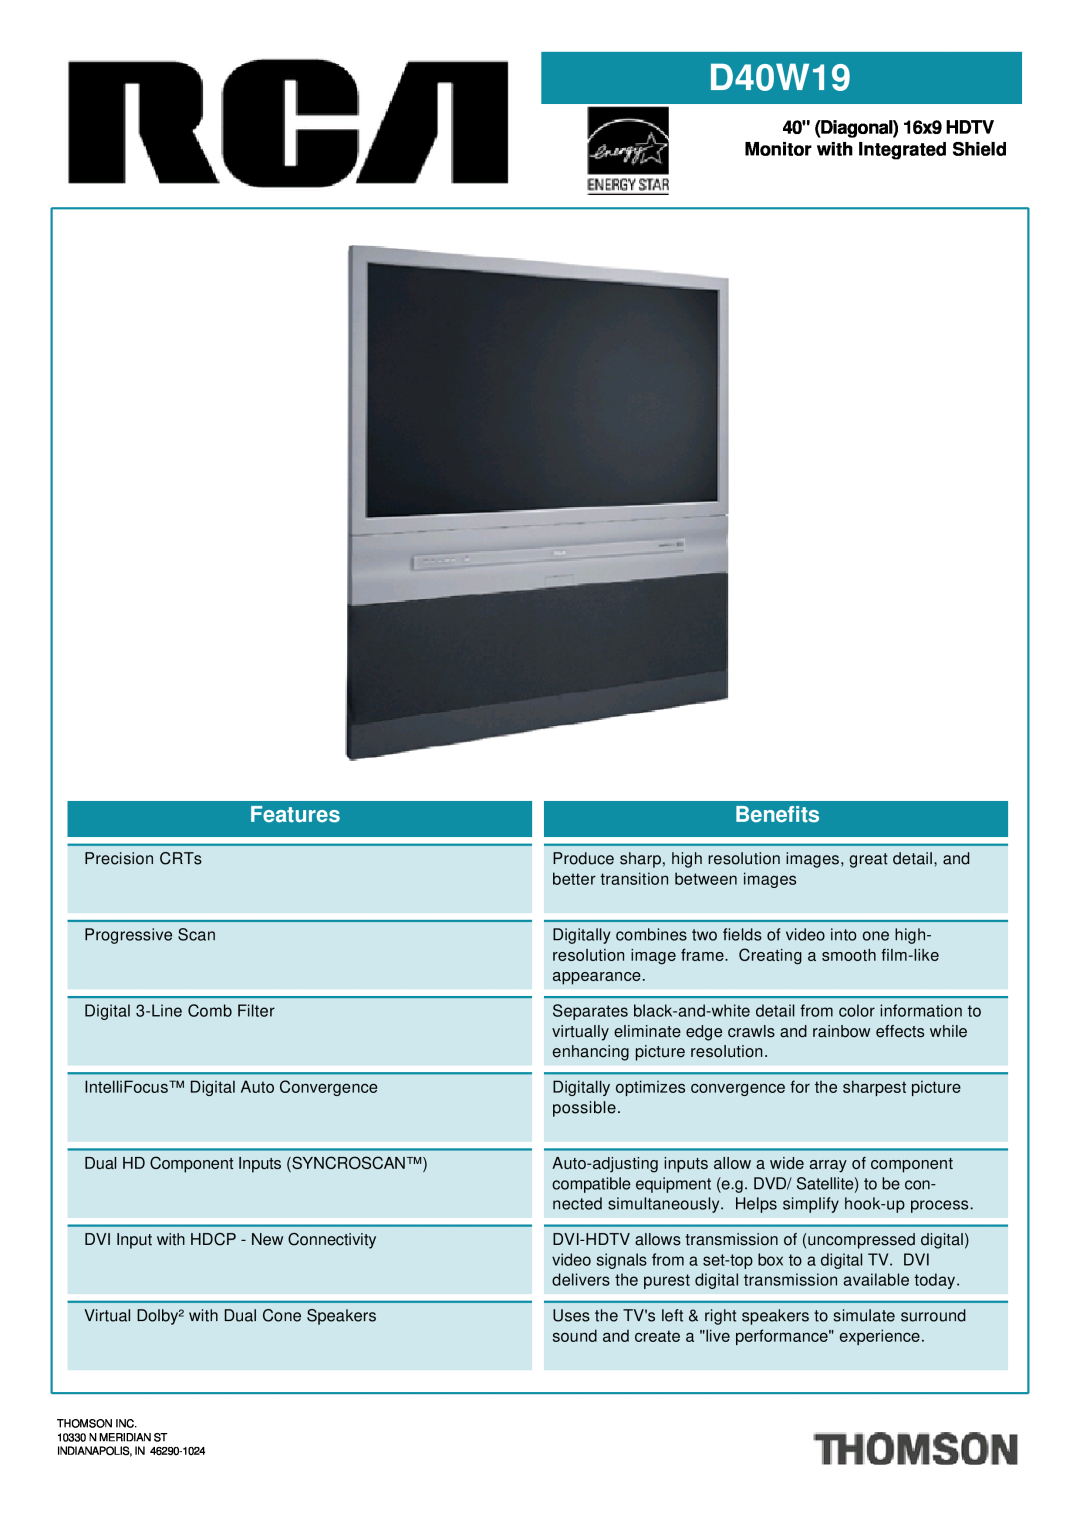 RCA RCR160TALM1 manual D40W19, Diagonal 16x9 HDTV Monitor with Integrated Shield, Features, Benefits 